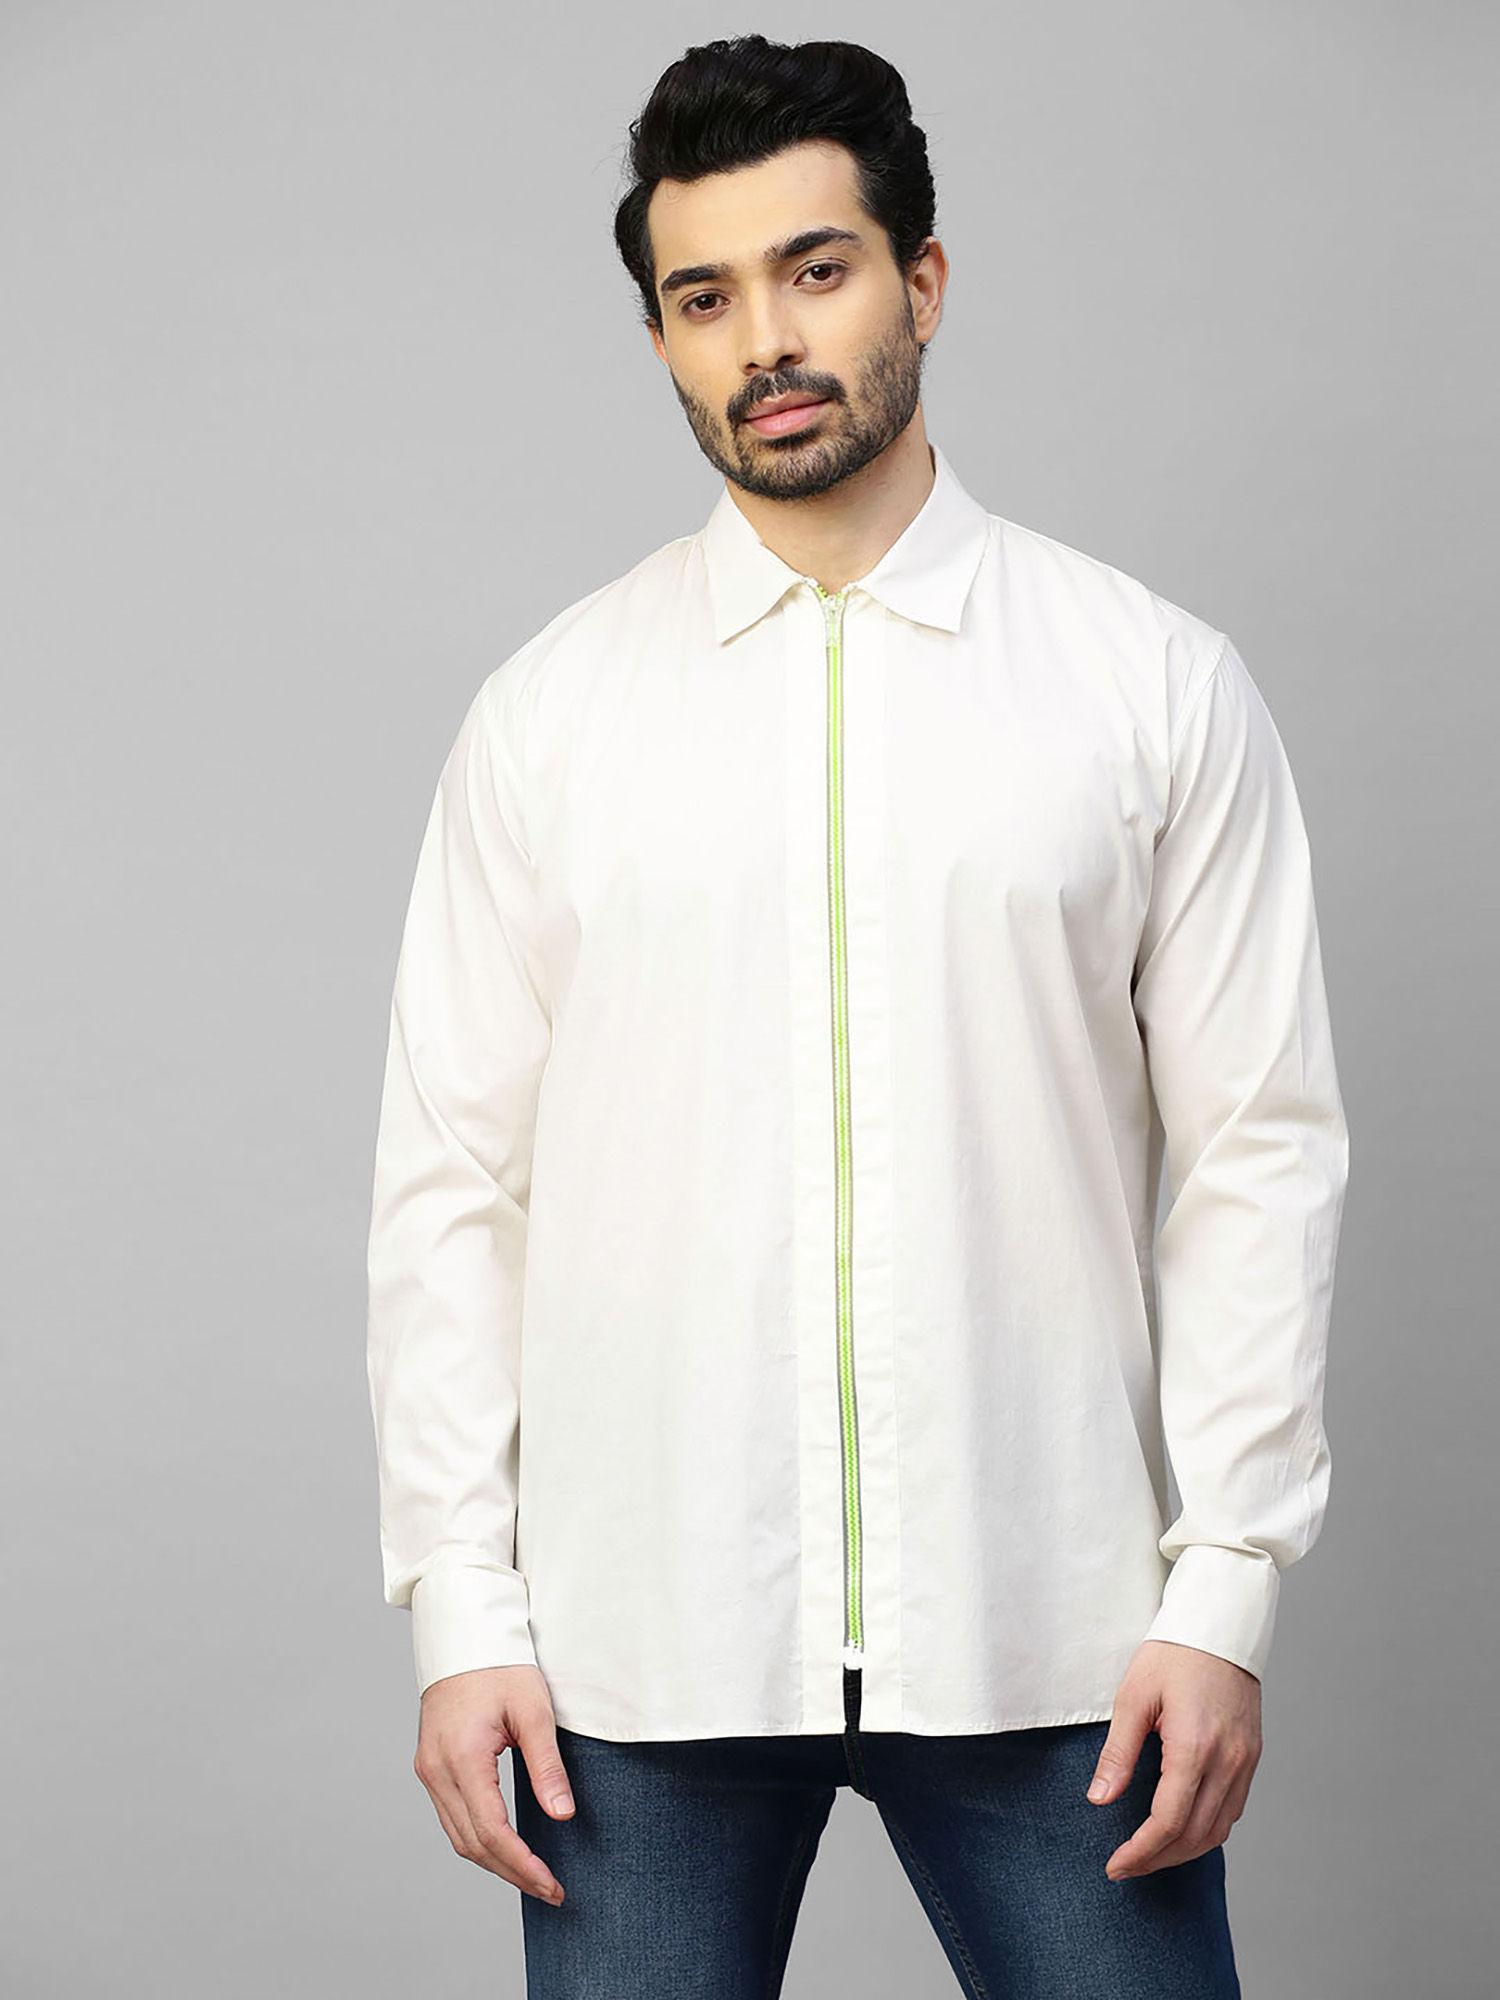 white shirt with neon zip detail and cross embellishment on the back